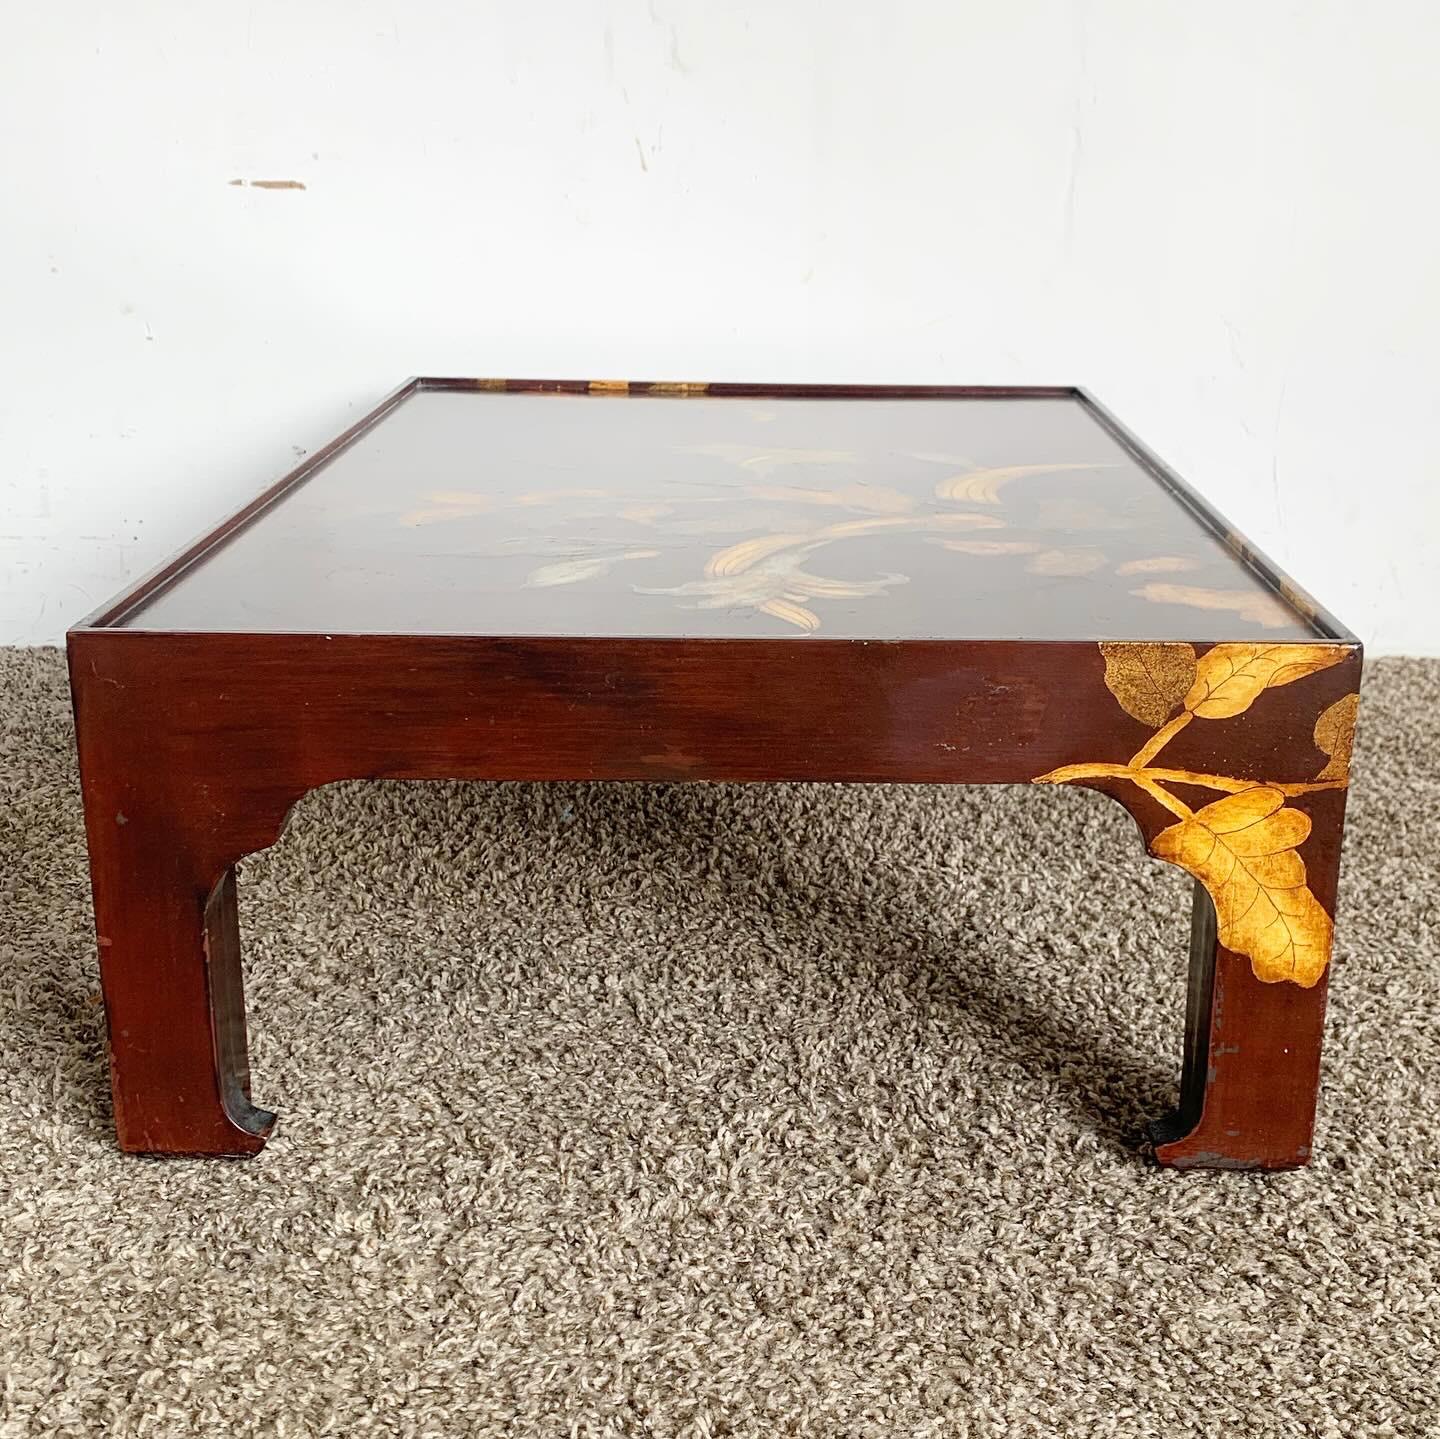 Vintage Asian Wooden Inlayed Asian Prayer Table For Sale 4